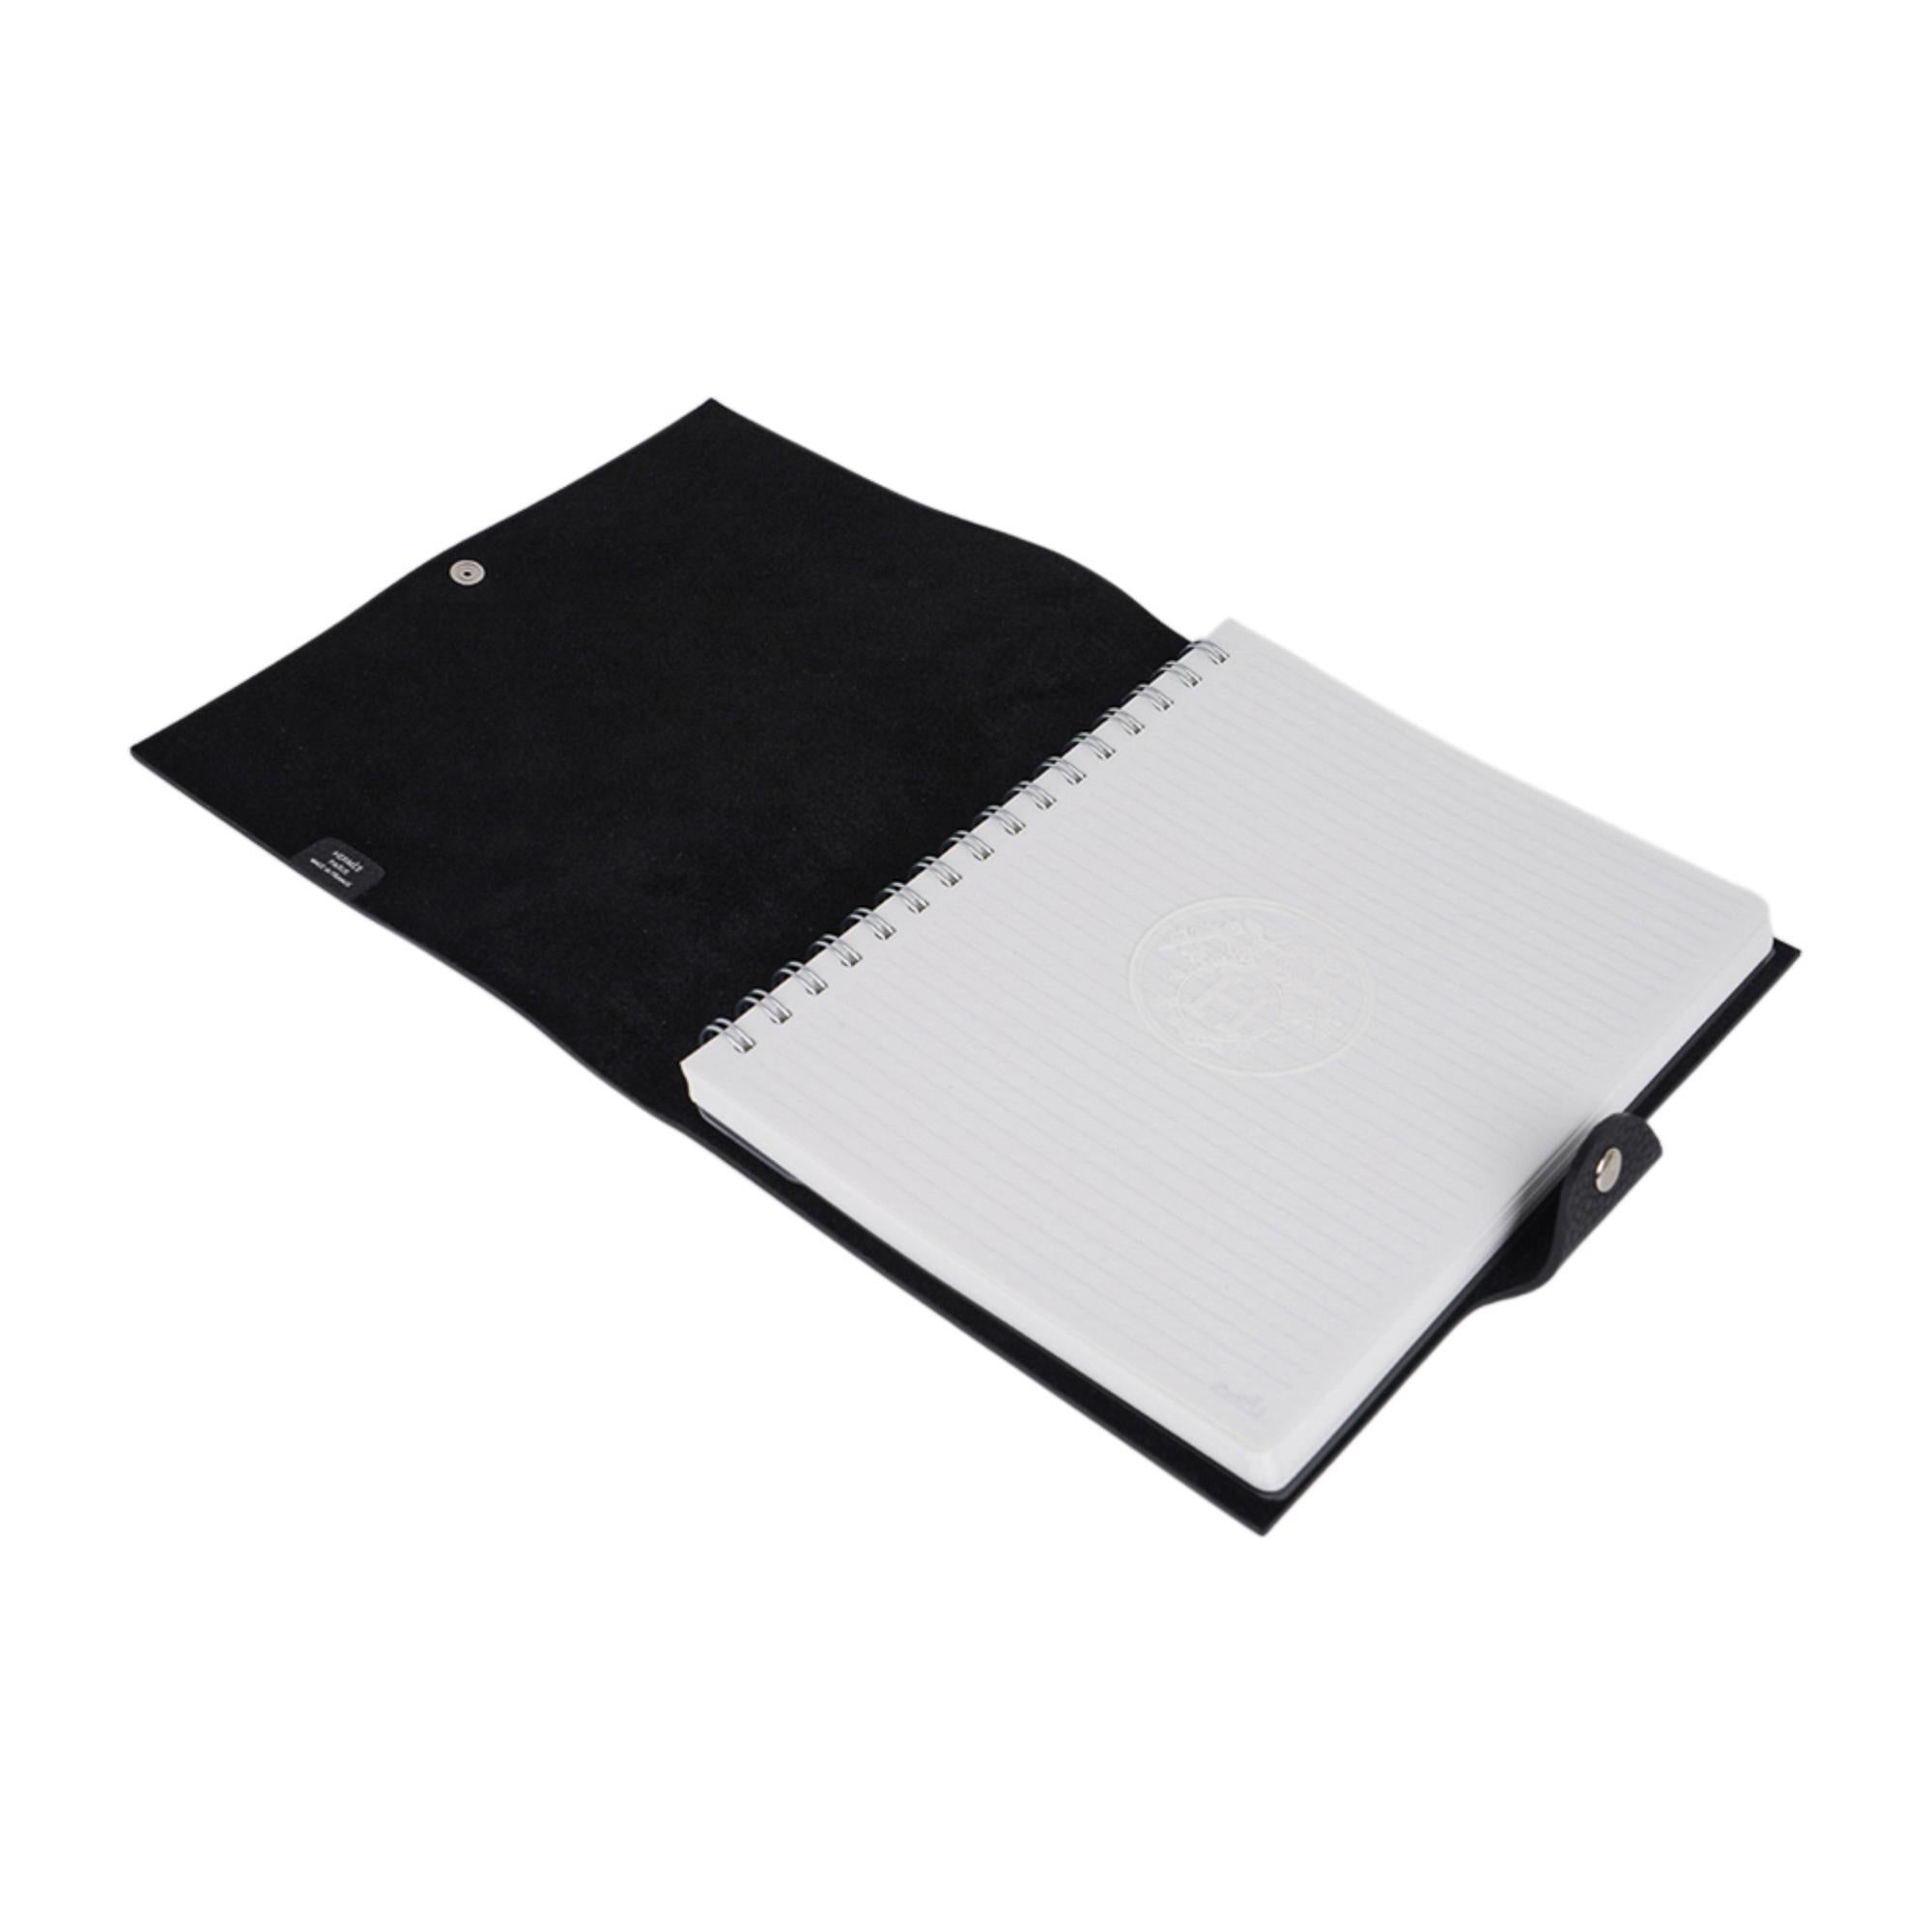 Hermes Ulysse MM Agenda Cover Black Togo with Refill New w/Box 3